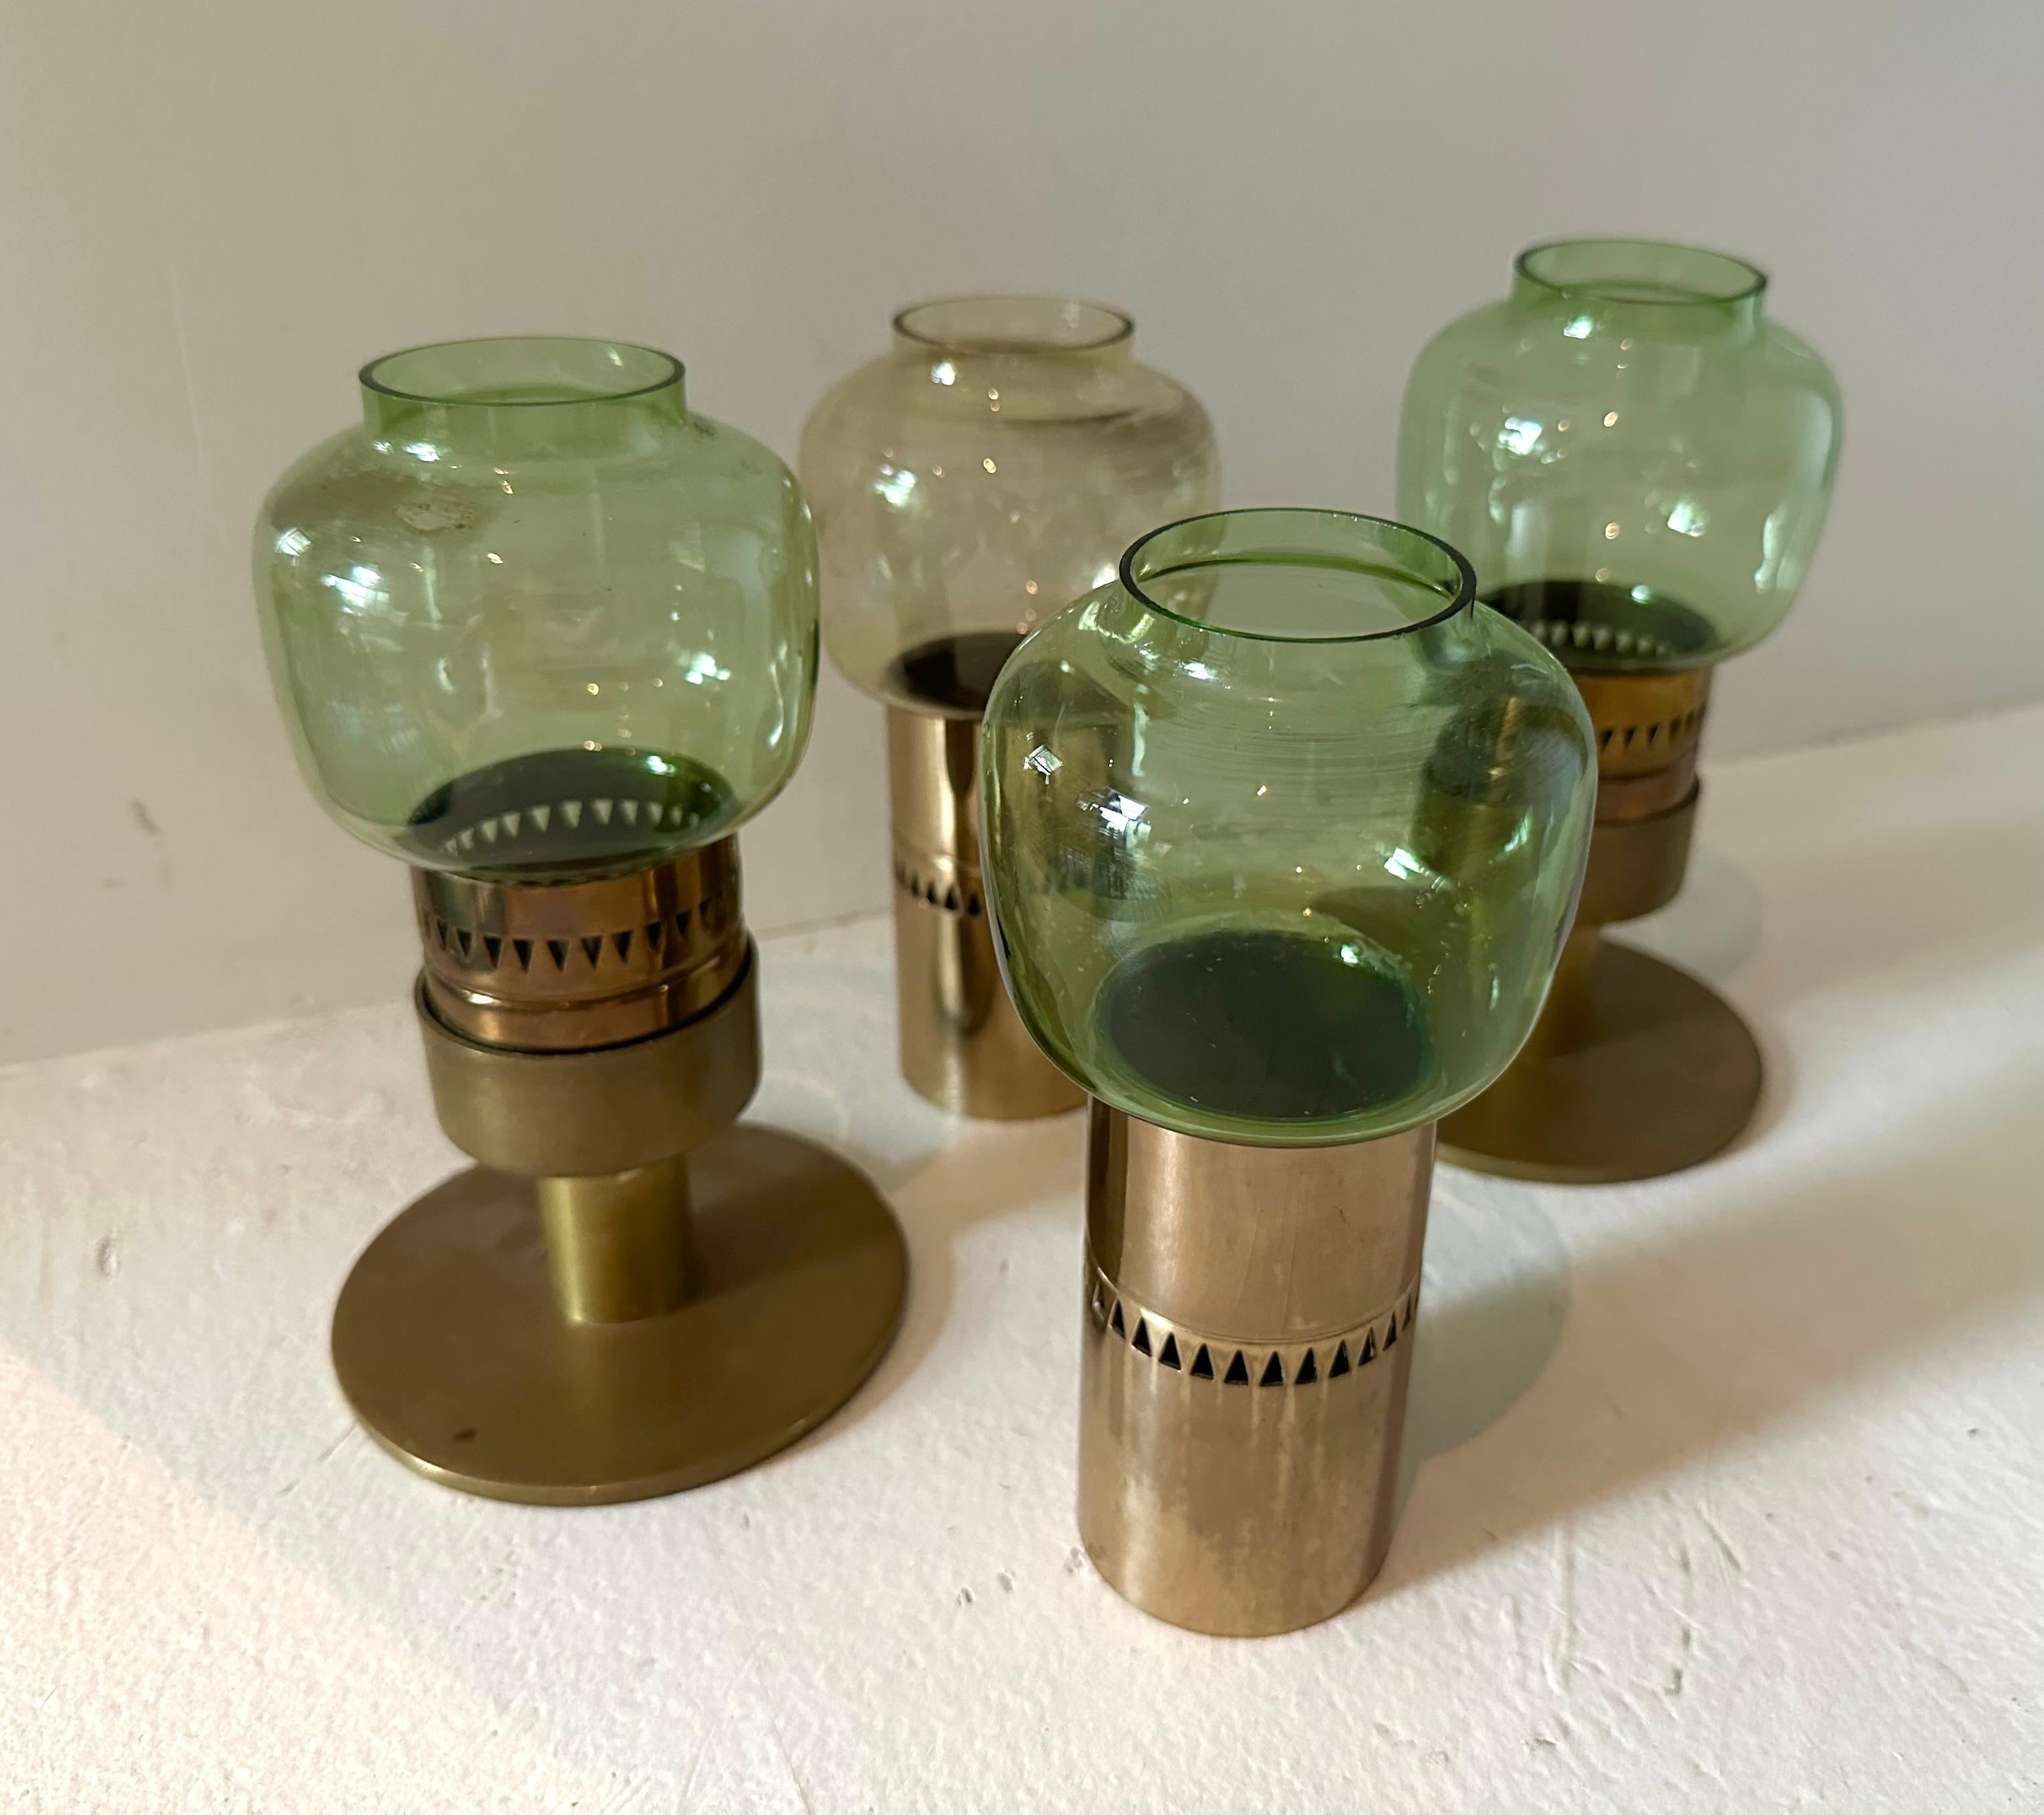 Cluster of four votive candlesticks with green tinted glass shades. Forms a little cityscape centerpiece or can be used individually. Etched signature to glass